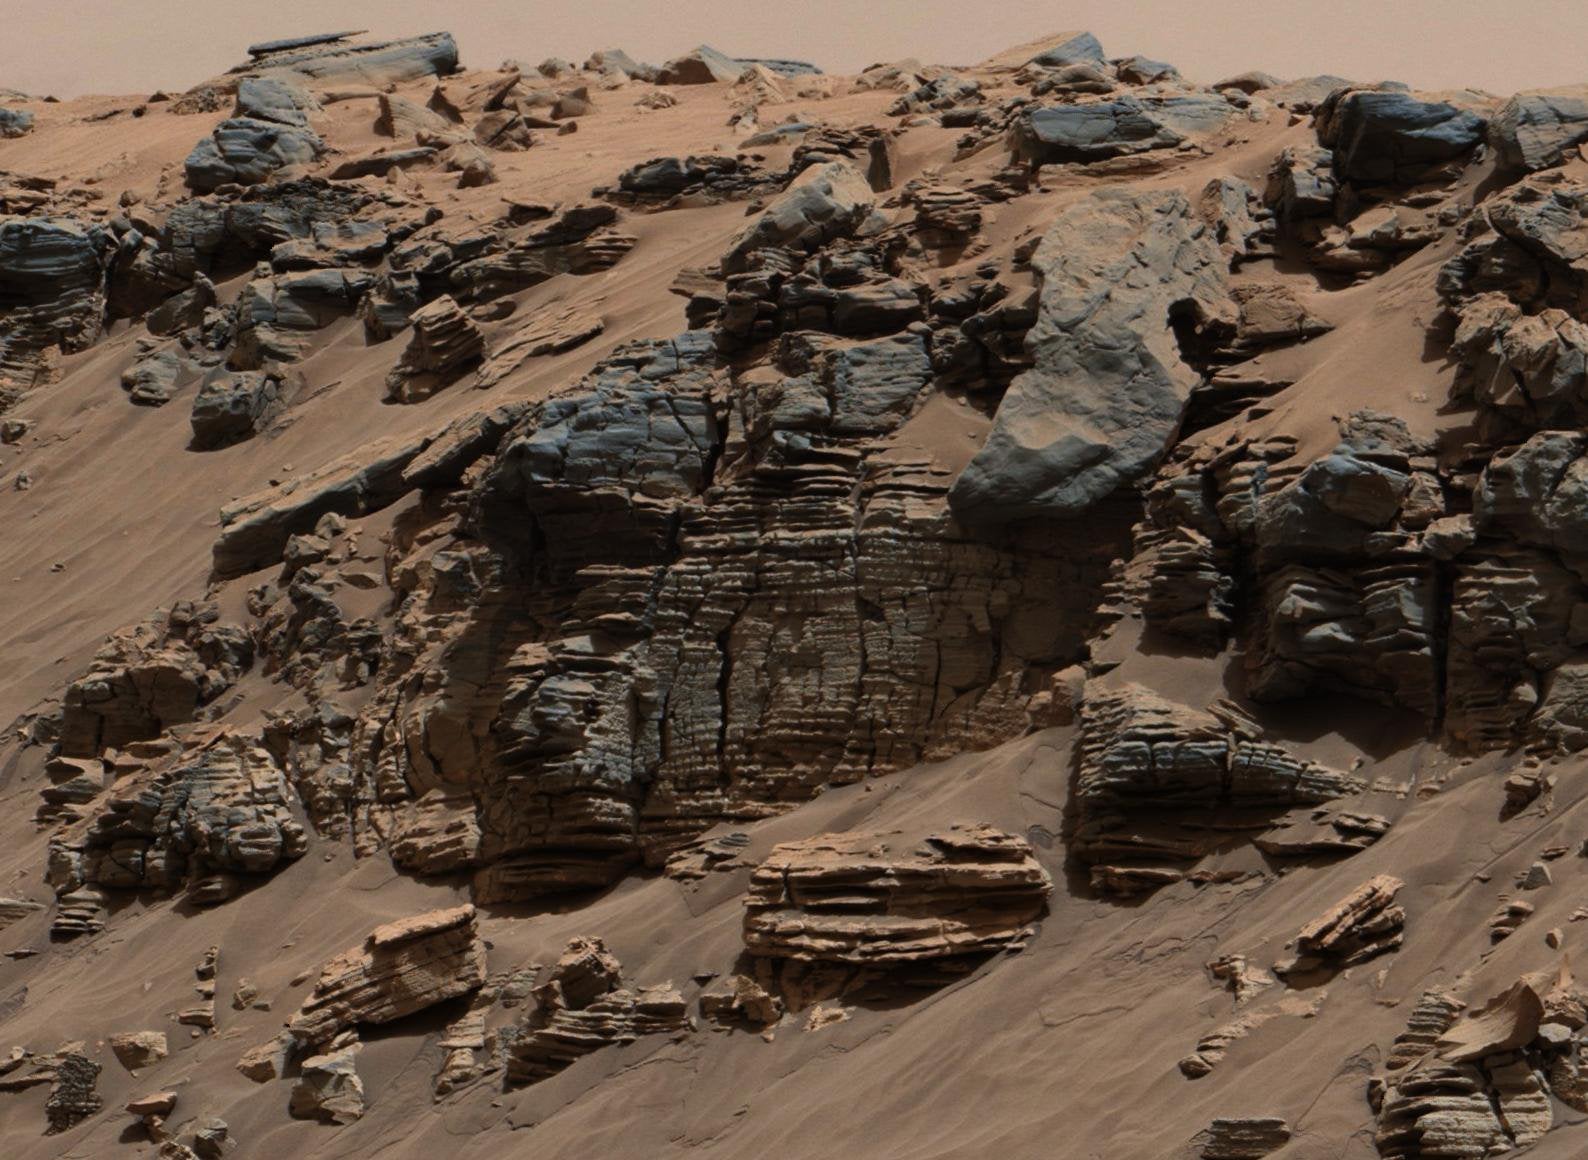 Sedimentary rock at the site of a former lake in Gale crater.  (Image: NASA/JPL-Caltech/MSSS)